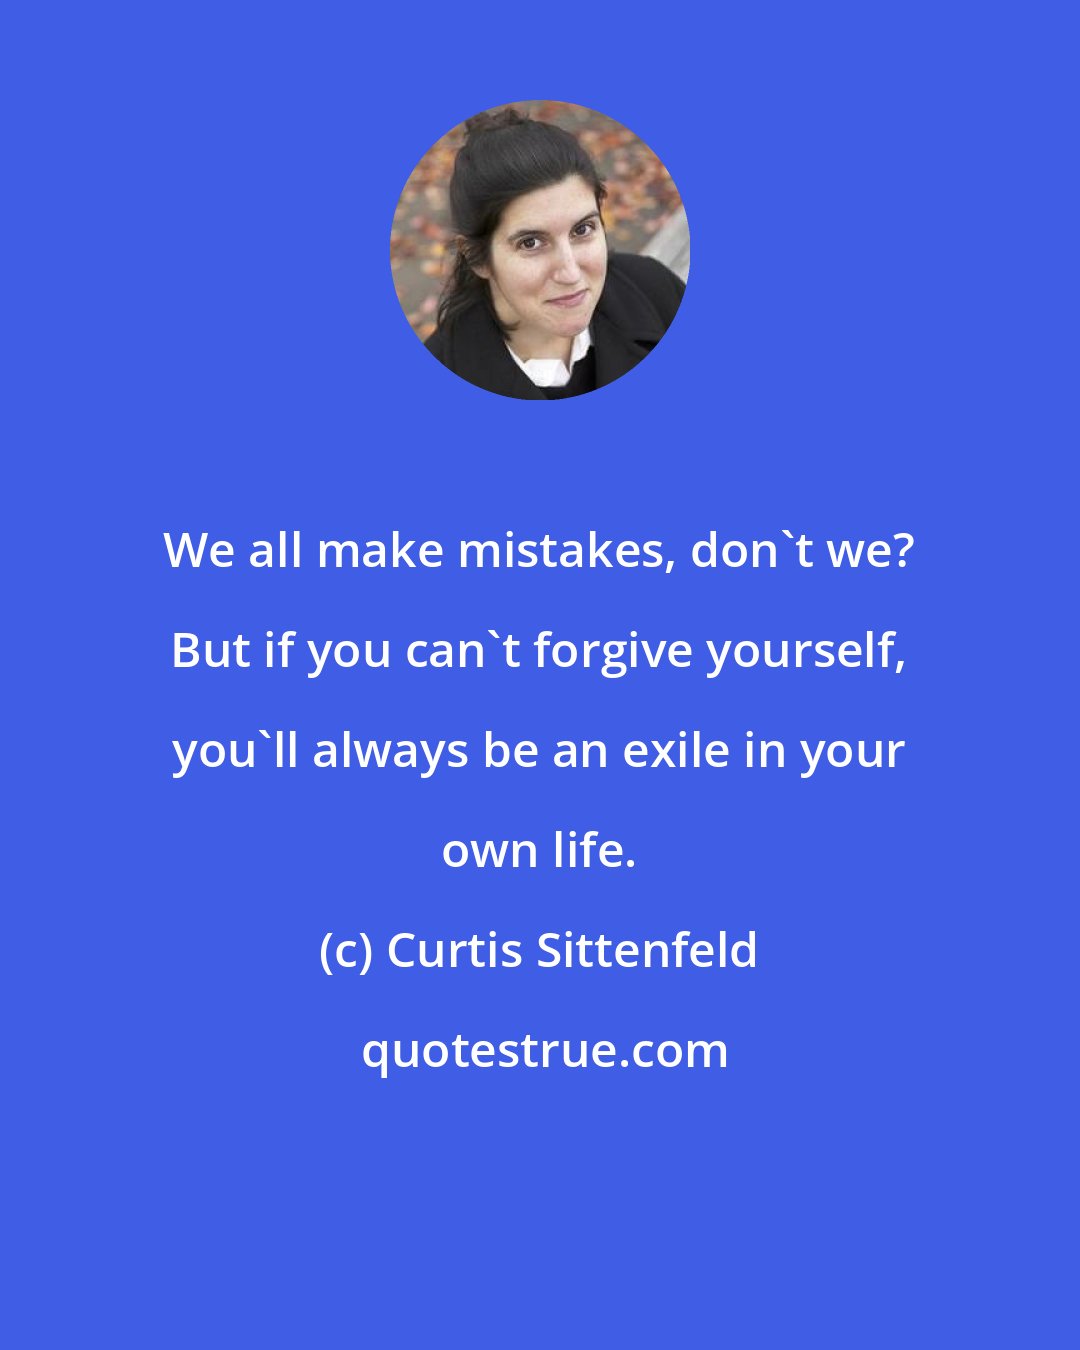 Curtis Sittenfeld: We all make mistakes, don't we? But if you can't forgive yourself, you'll always be an exile in your own life.